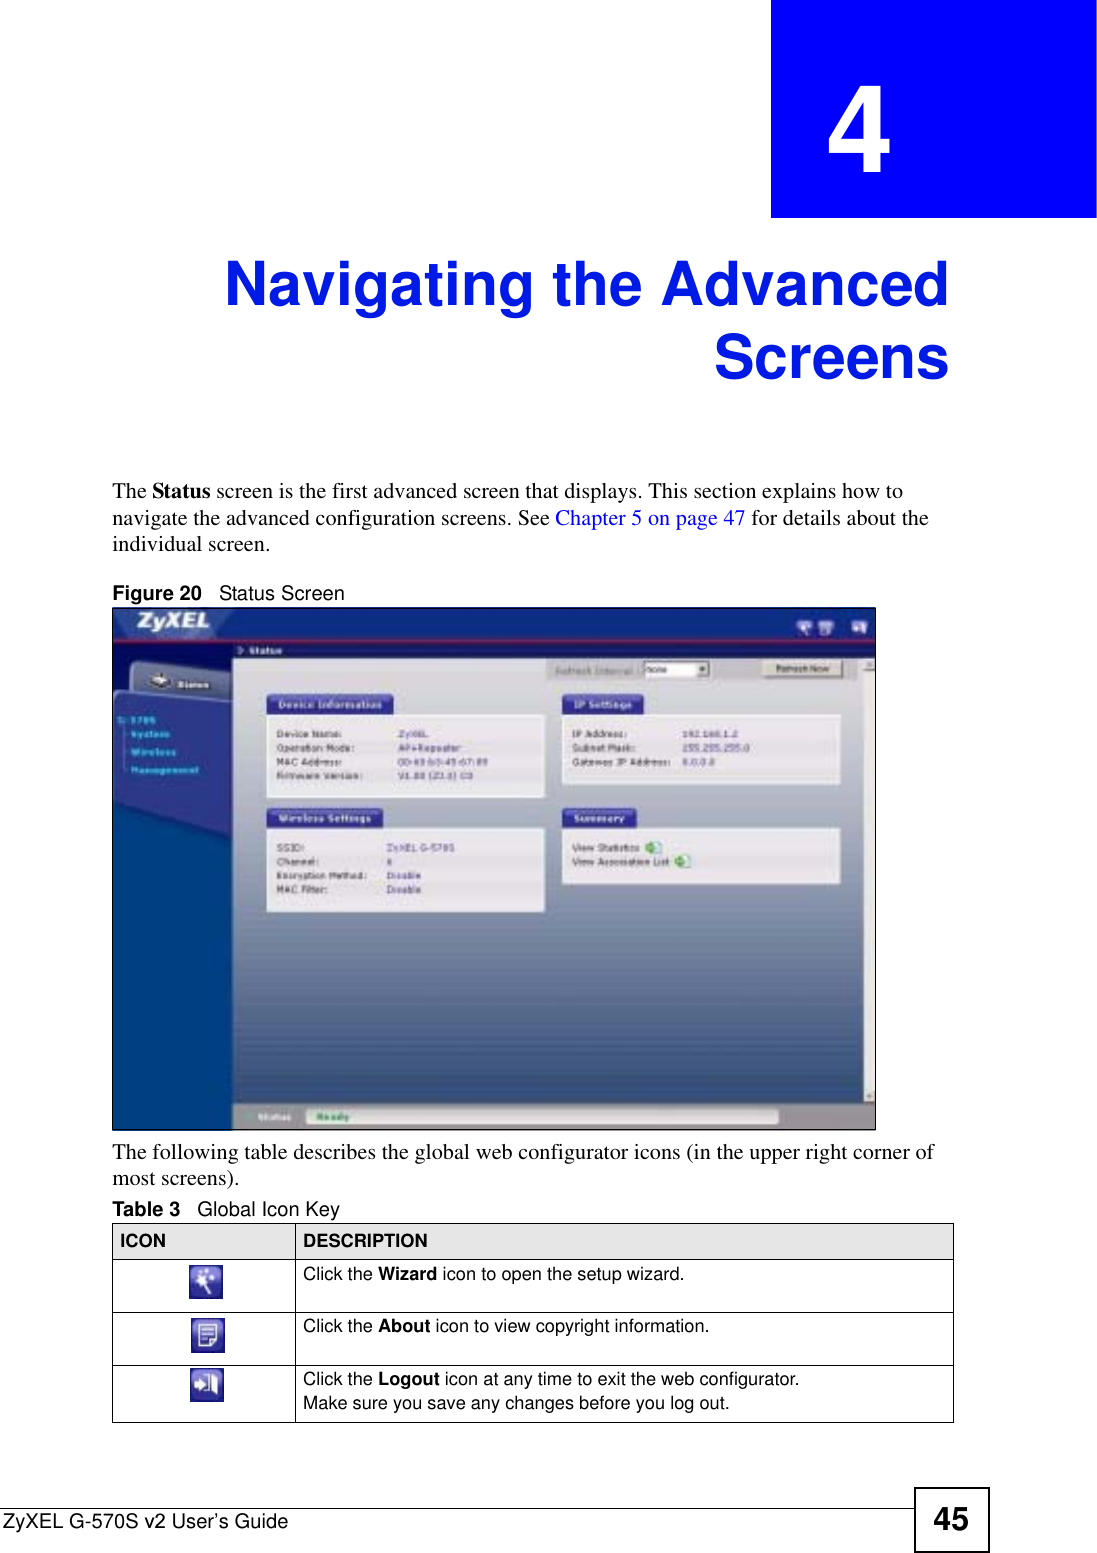 ZyXEL G-570S v2 User’s Guide 45CHAPTER  4 Navigating the AdvancedScreensThe Status screen is the first advanced screen that displays. This section explains how to navigate the advanced configuration screens. See Chapter 5 on page 47 for details about the individual screen.Figure 20   Status ScreenThe following table describes the global web configurator icons (in the upper right corner of most screens).Table 3   Global Icon KeyICON DESCRIPTIONClick the Wizard icon to open the setup wizard. Click the About icon to view copyright information.Click the Logout icon at any time to exit the web configurator.Make sure you save any changes before you log out.